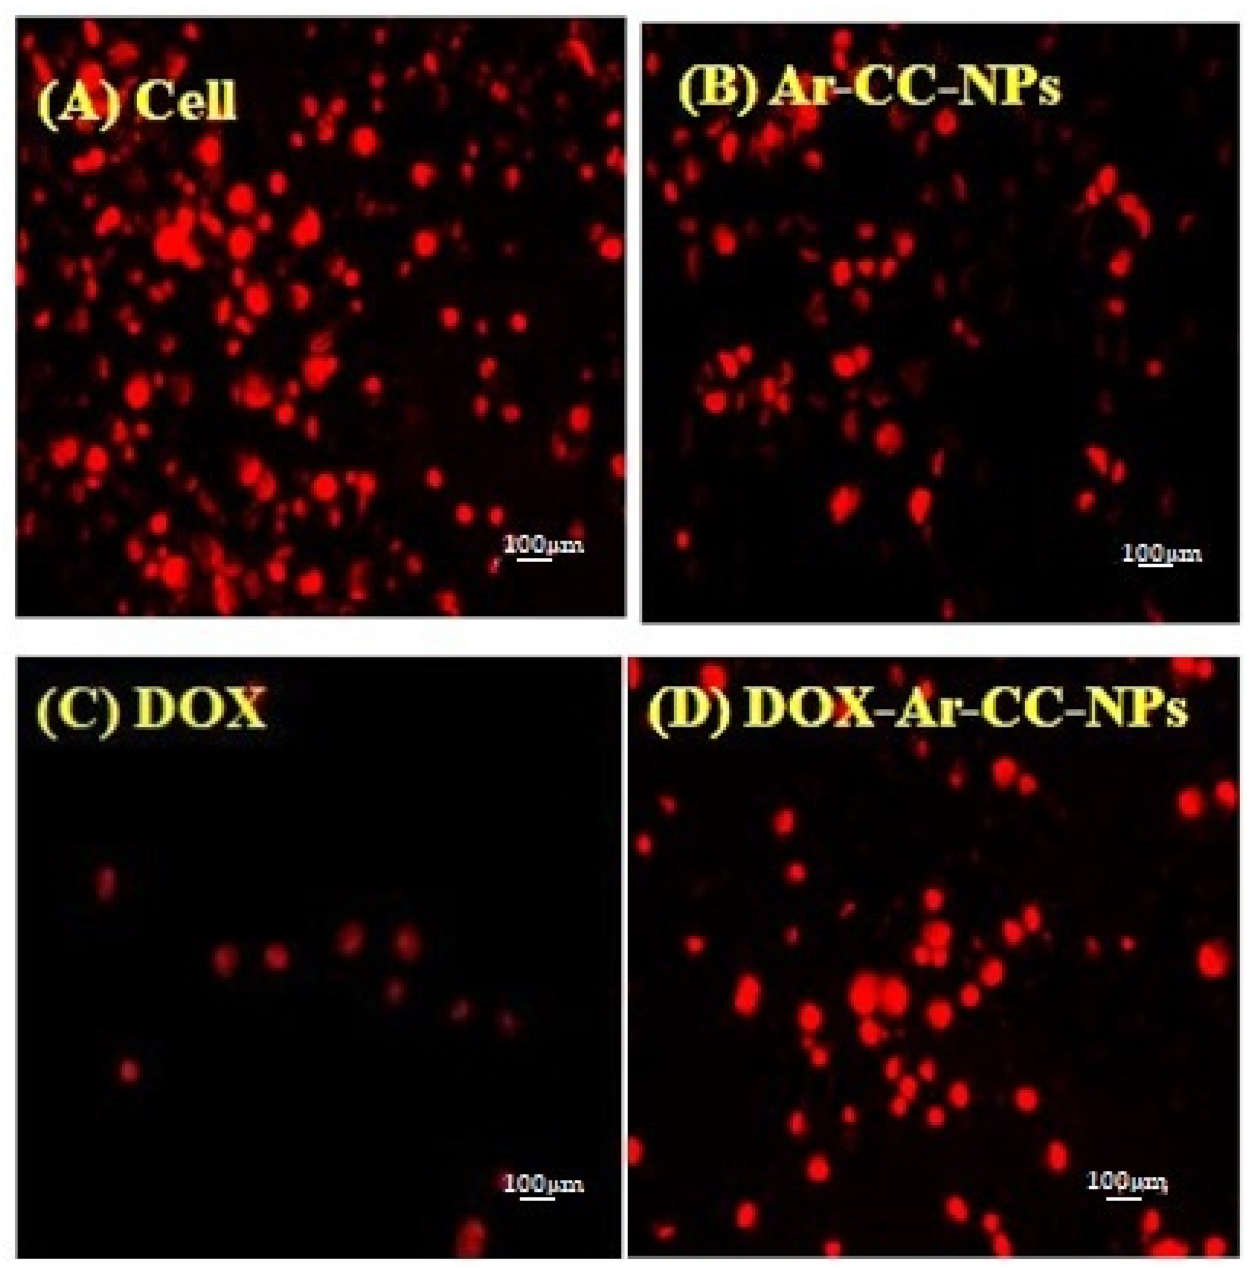 Biology Free Full Text Lc Ms Ms Proteomic Study Of Mcf 7 Cell Treated With Dox And Dox Loaded Calcium Carbonate Nanoparticles Revealed Changes In Proteins Related To Glycolysis Actin Signalling And Energy Metabolism